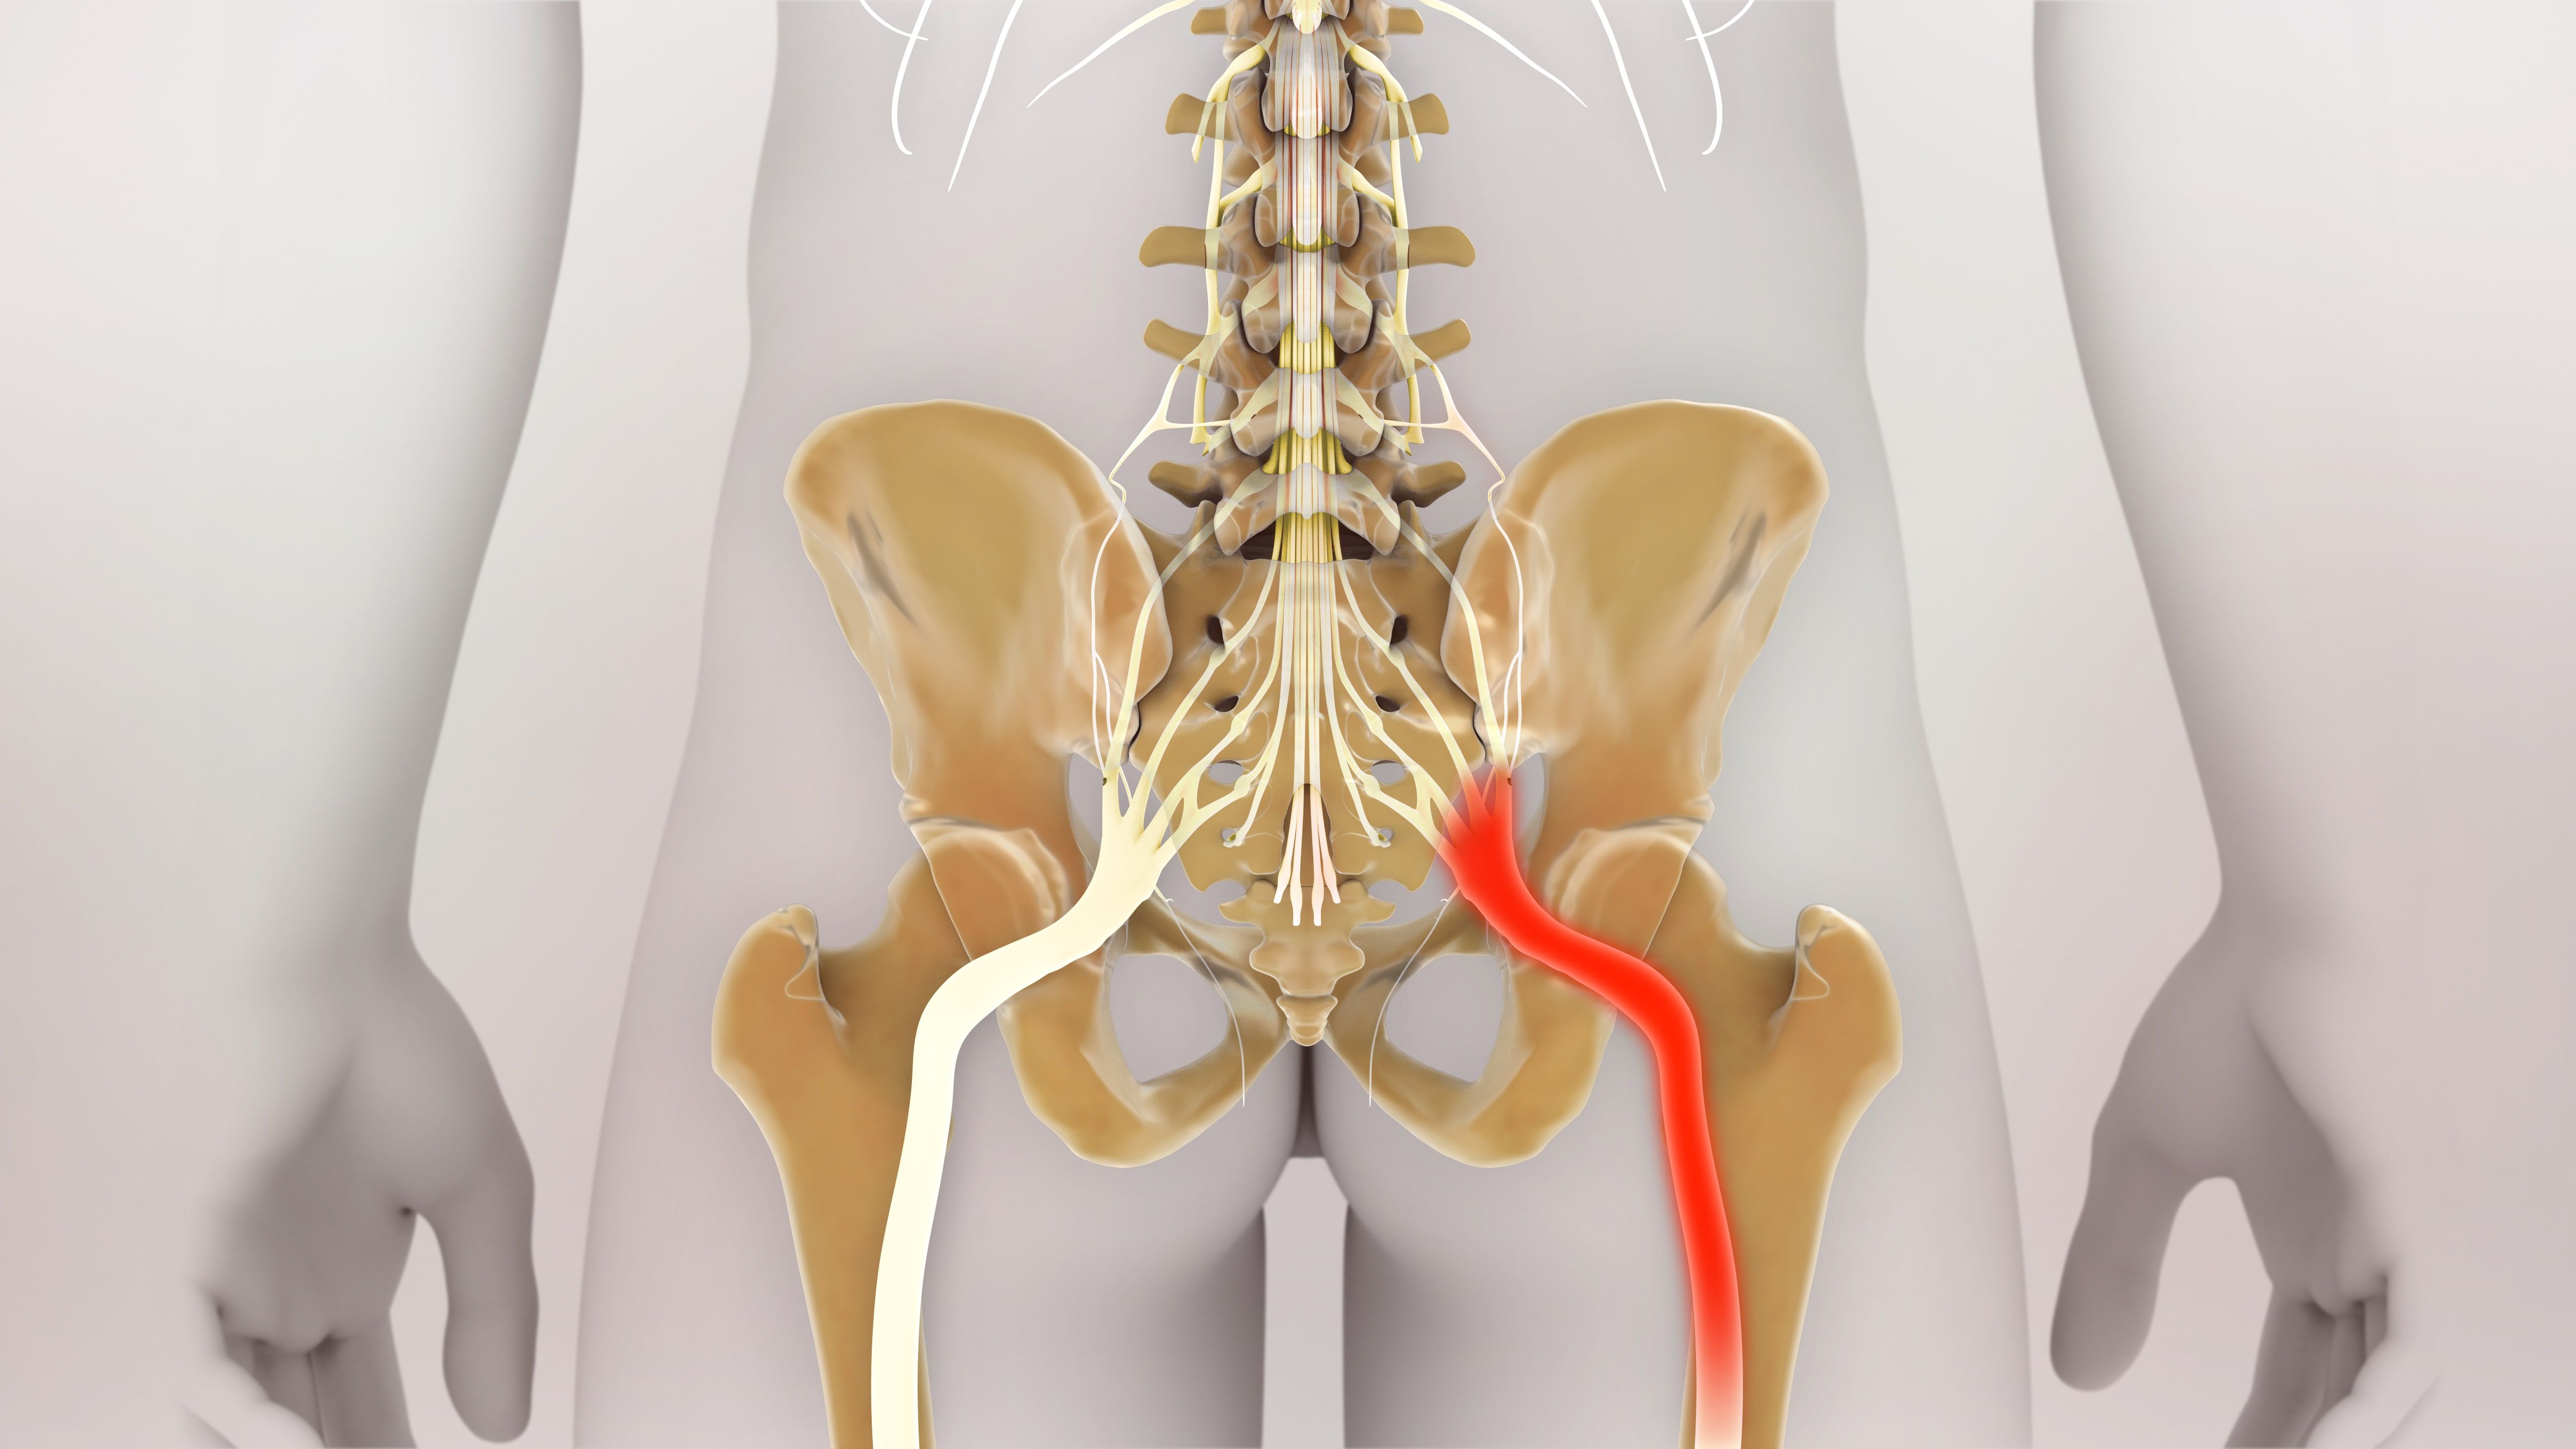 What You Need to Know About Sciatica - NJ's Top Orthopedic Spine